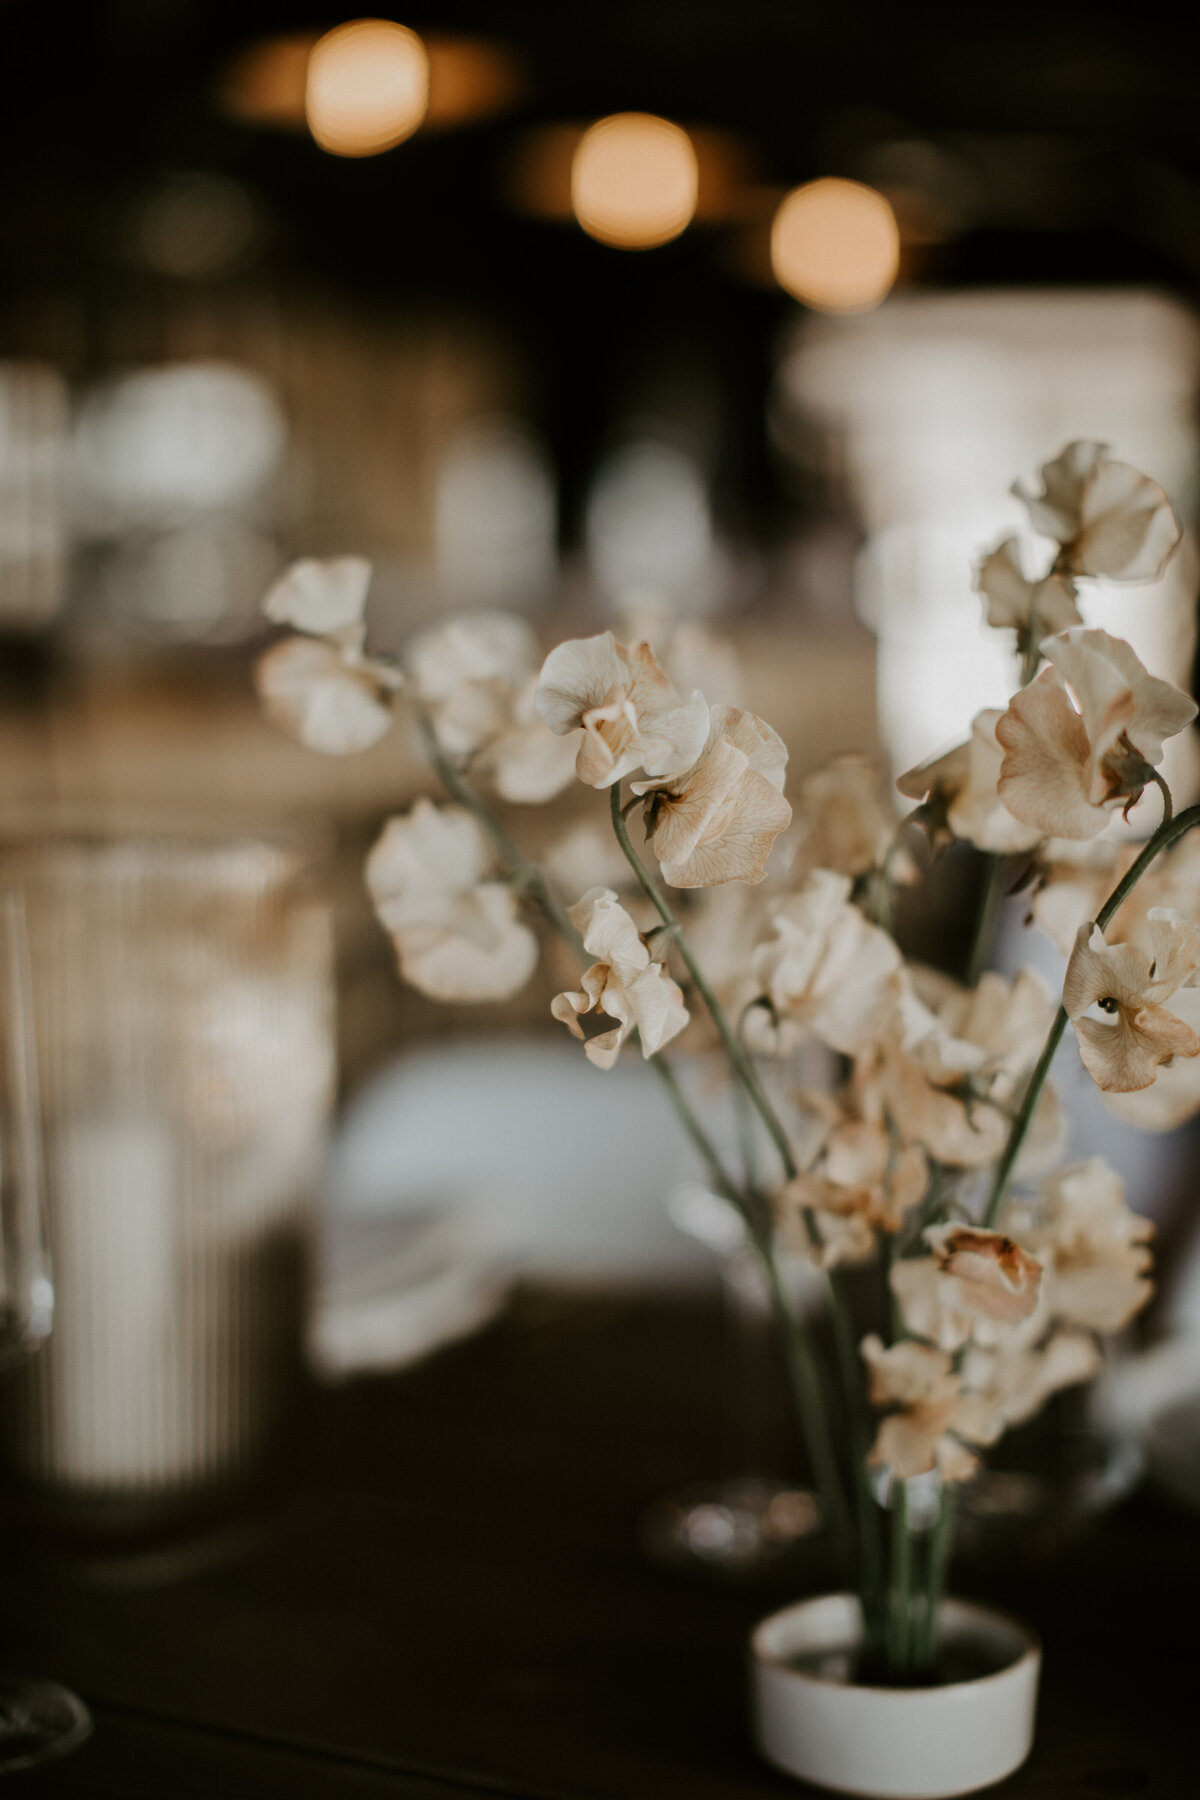 Ivory-colored flowers set on a table with candlesticks in  glass .